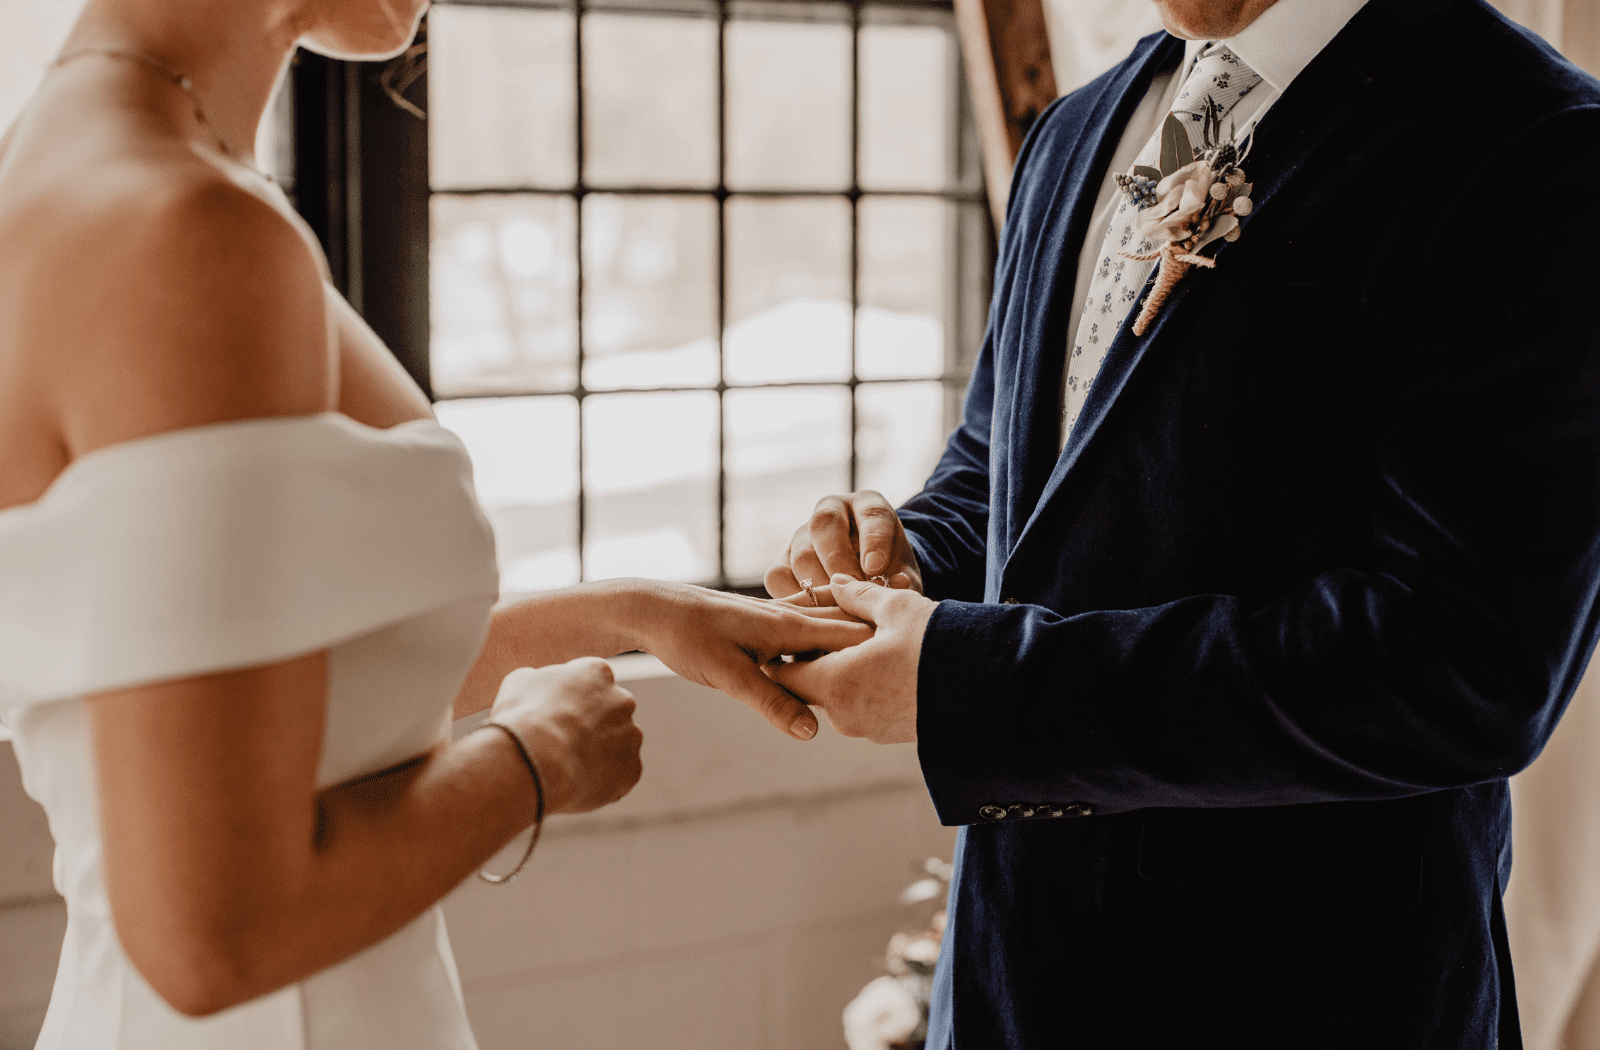 Average Price of Wedding Ring: How Much to Spend? - The GentleManual